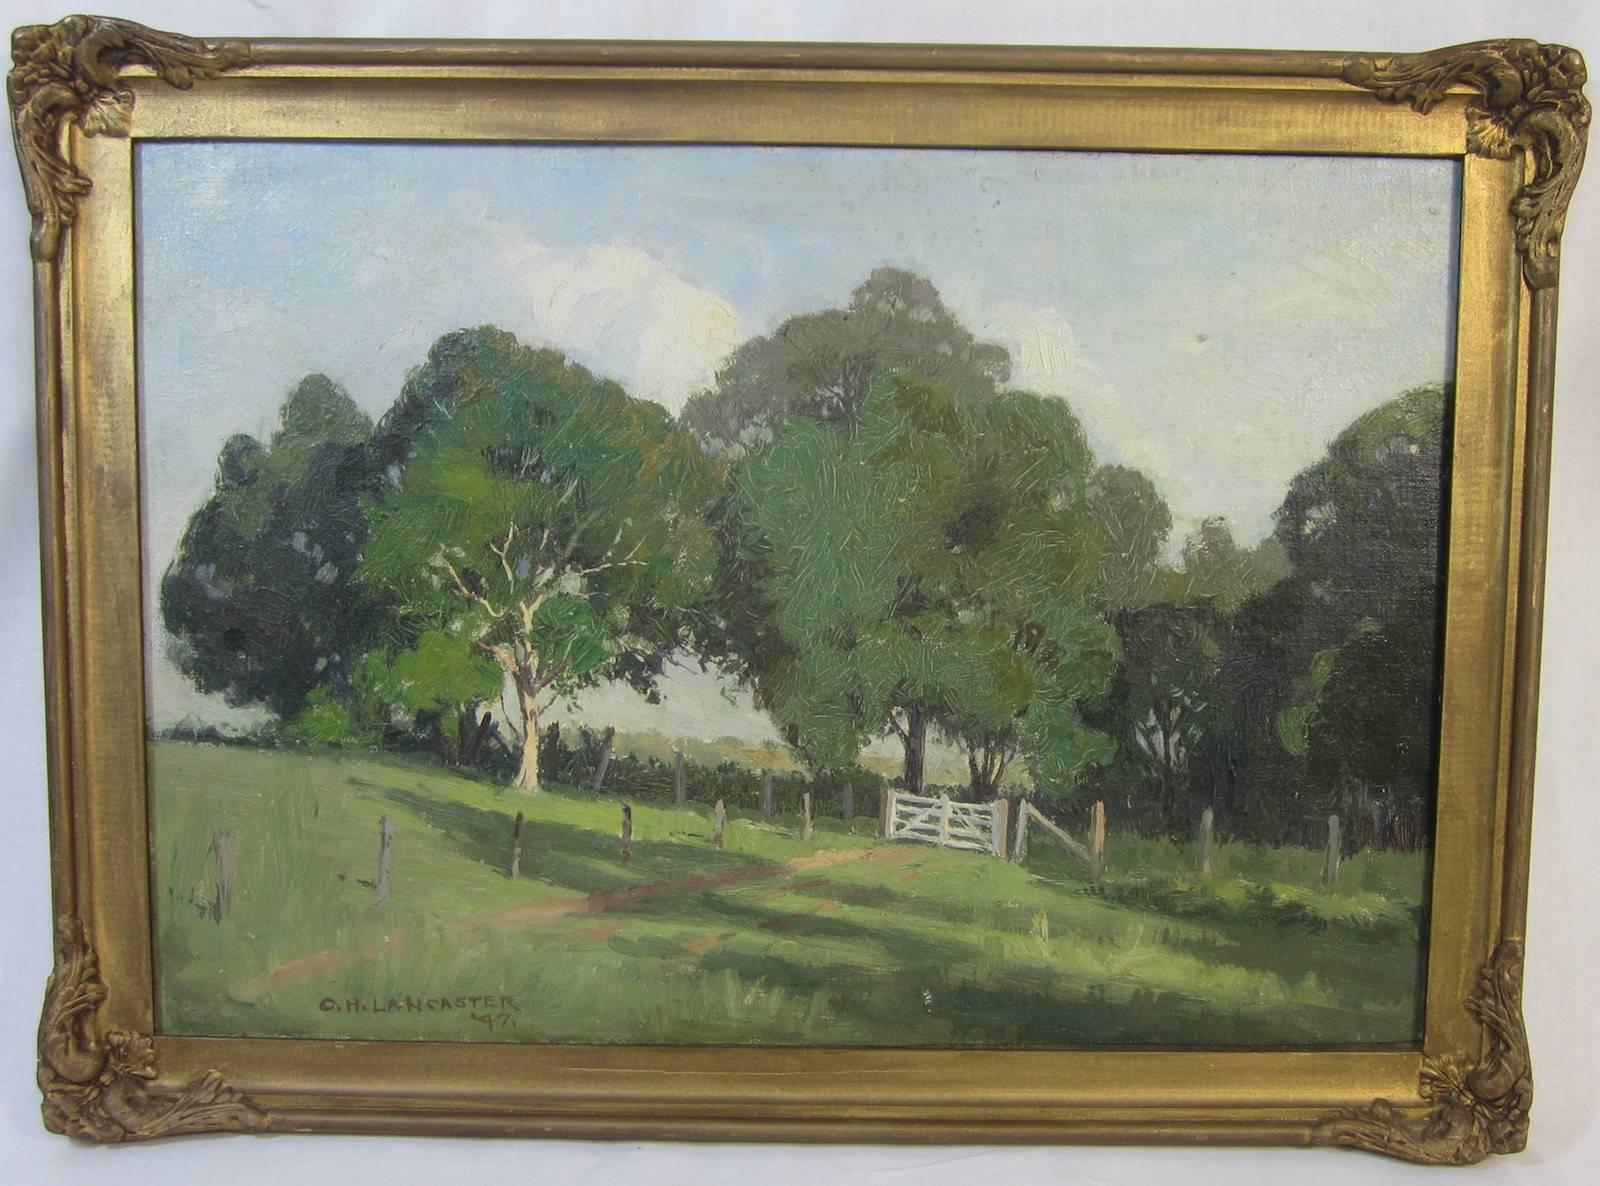 Charles Henry Lancaster (1886-1959) Australia, 
oil on board, The Gate Merri Merri, signed and dated 1944 bottom left,
 image 39 x 28cm
Charles Lancaster was significant figure in Brisbane art through his service of the committee of the